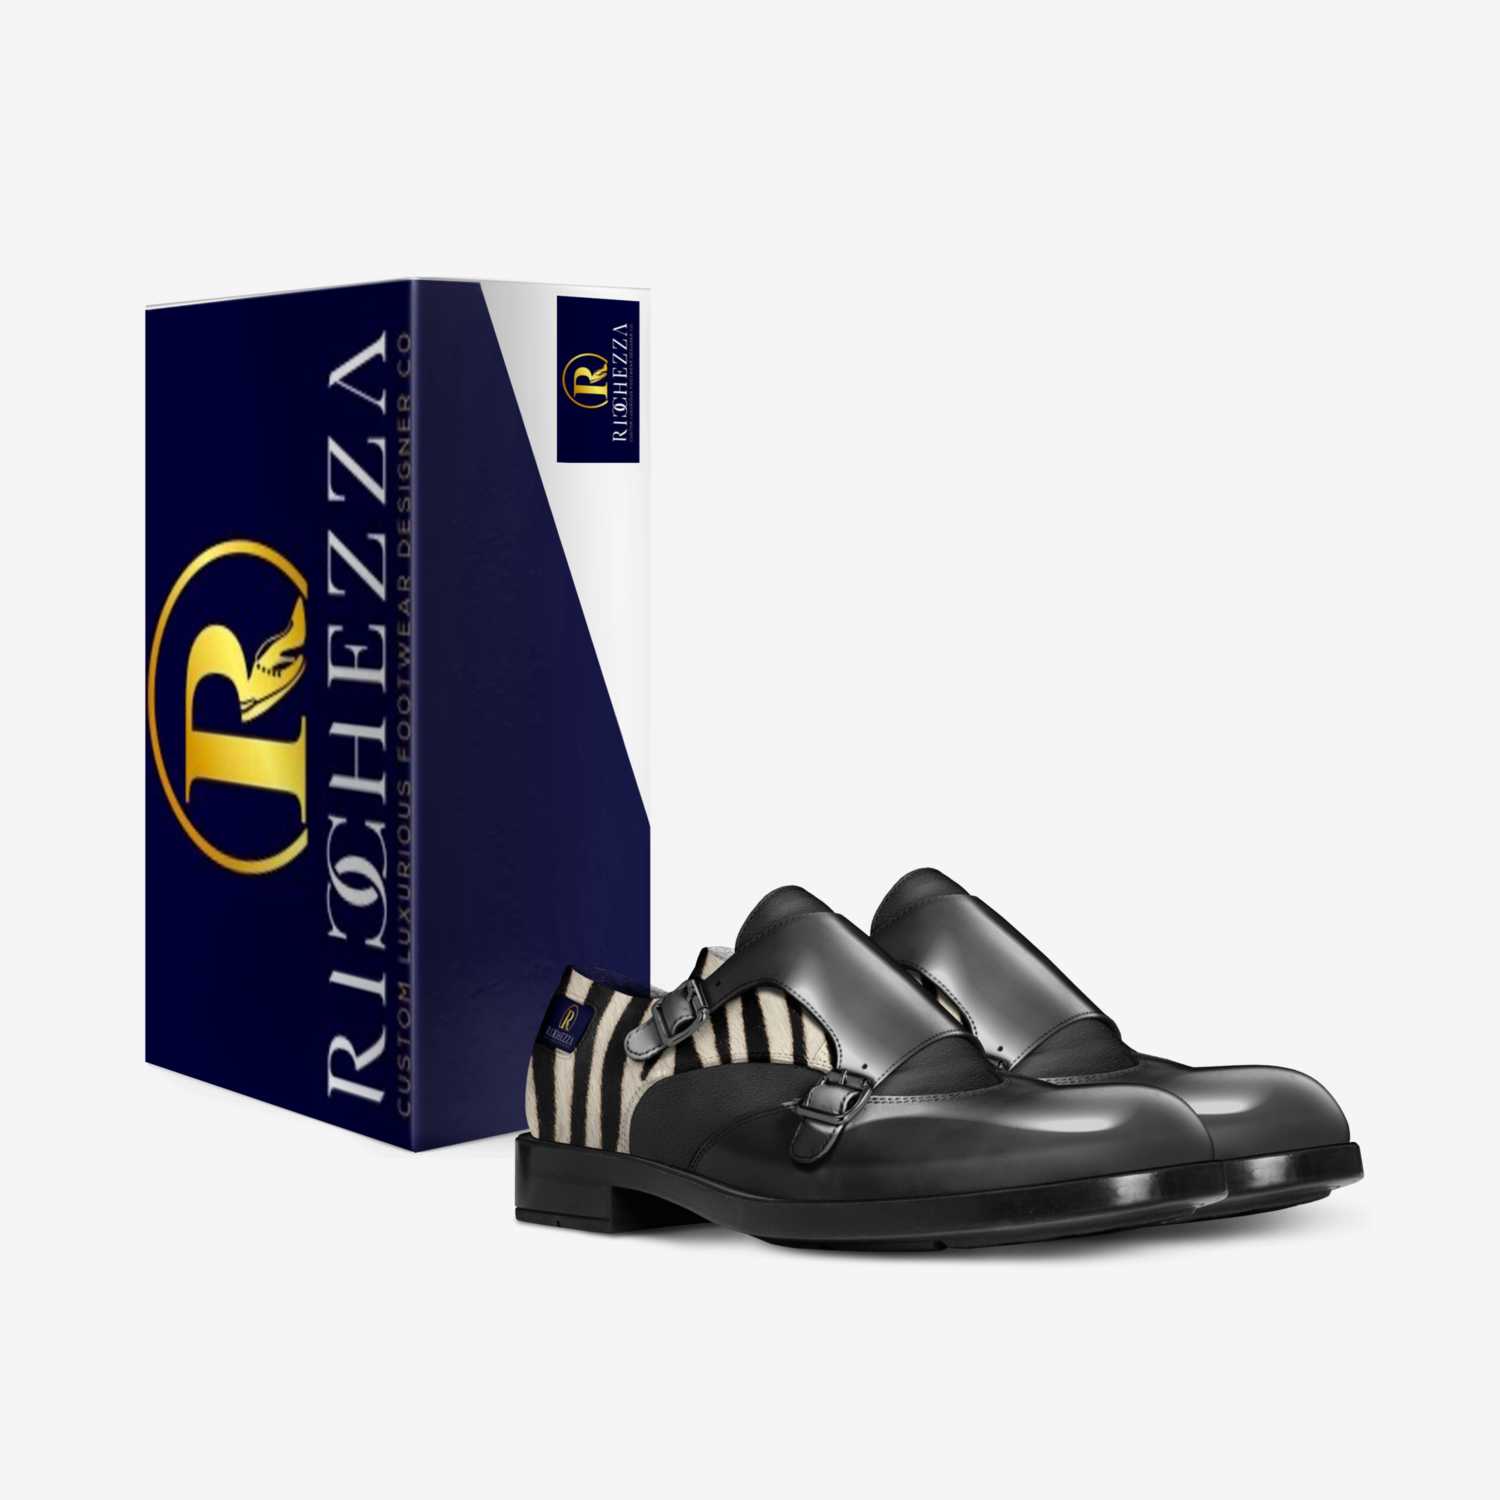 The Zulu custom made in Italy shoes by Ricchezza Custom Footwear Designer Co. | Box view